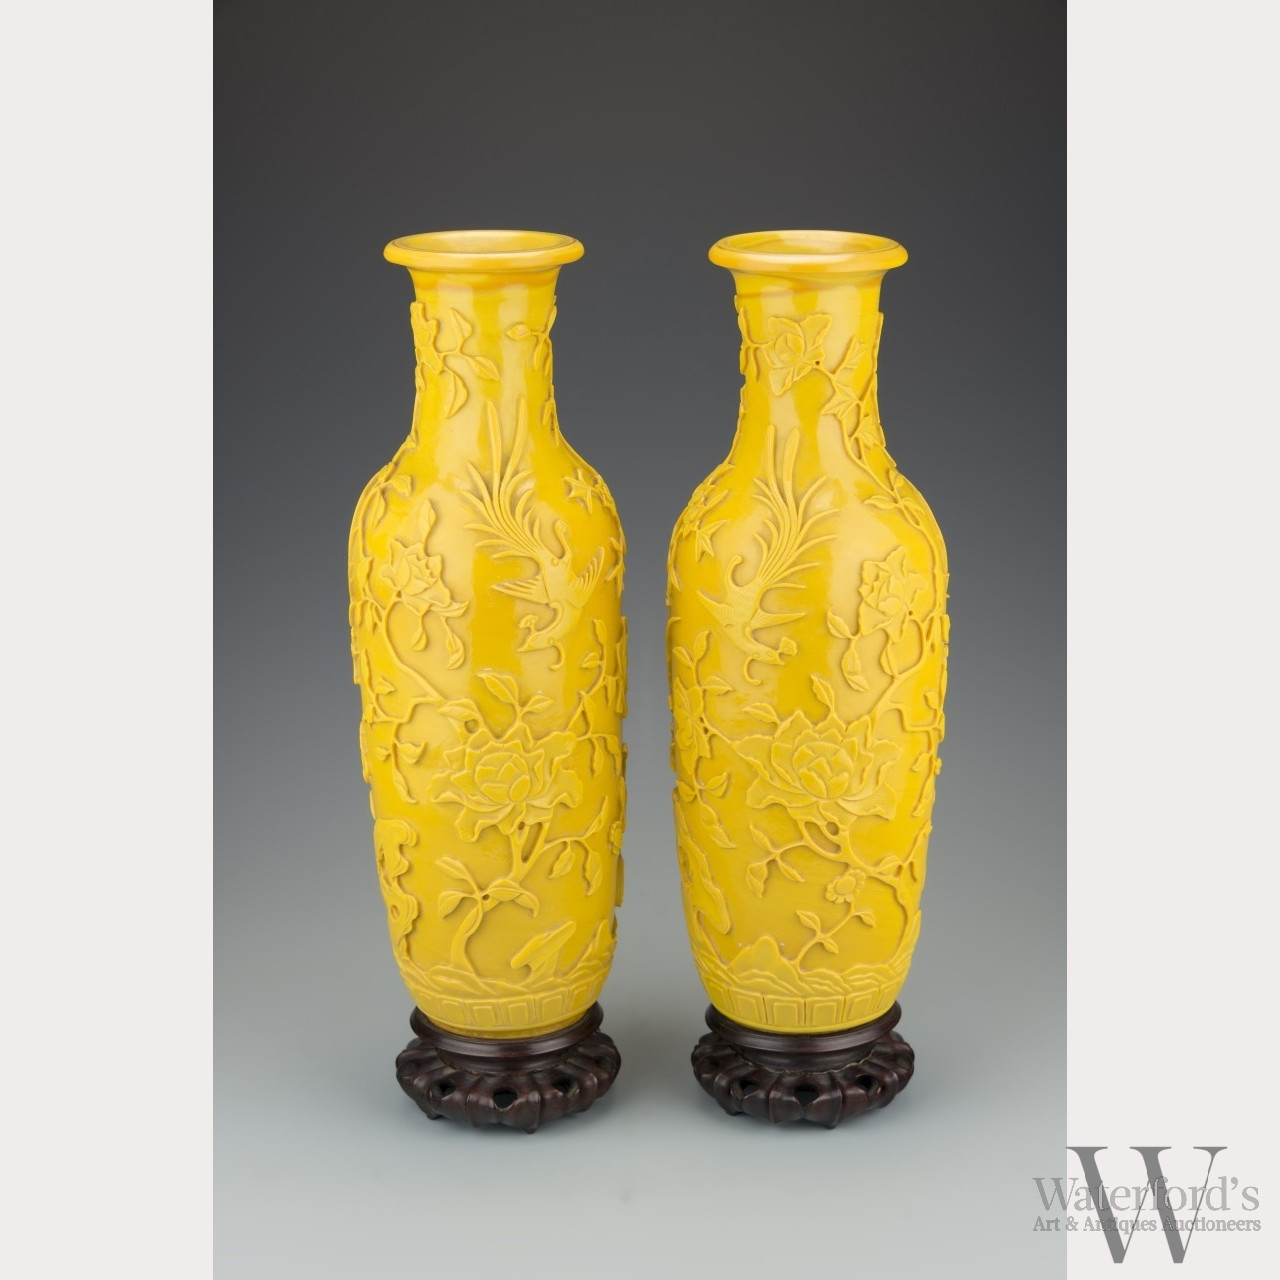 peking glass vase for sale of a pair of chinese imperial yellow peking glass vases qianlong mark with a pair of chinese imperial yellow peking glass vases qianlong mark and period lot 22